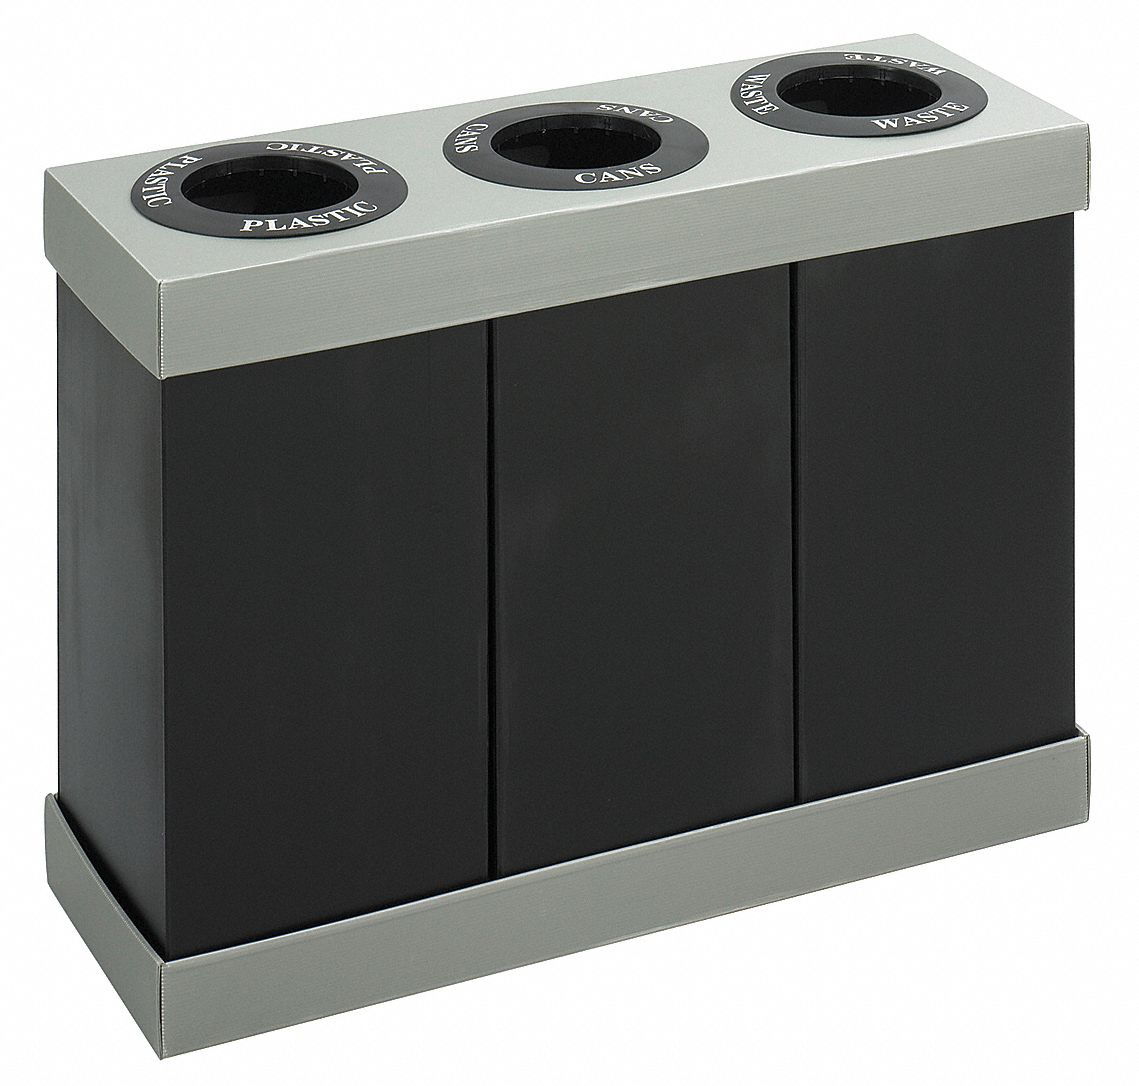 19YA38 - Desk Recycling Container Black 84 gal.